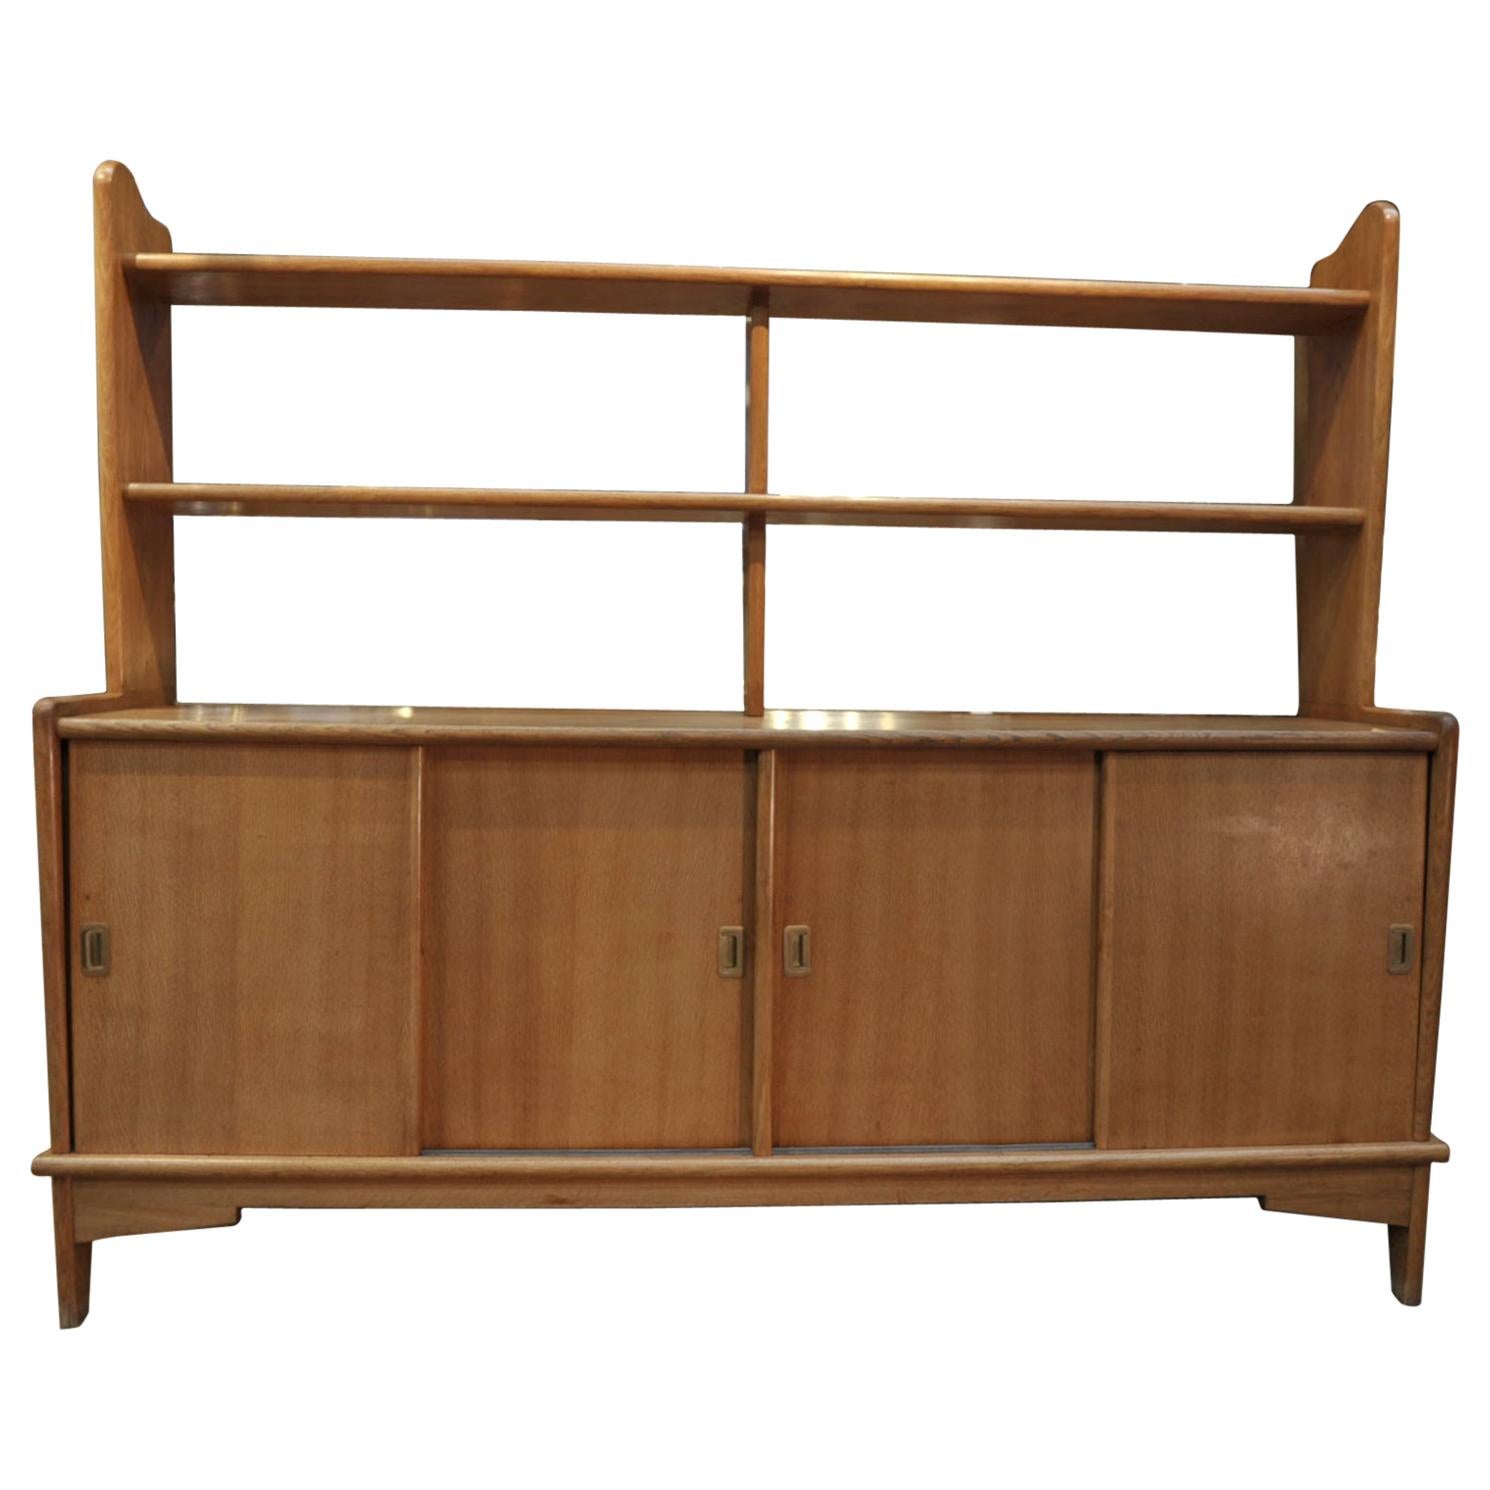 French Solid Oak Midcentury Shelf Cabinet, circa 1950 For Sale